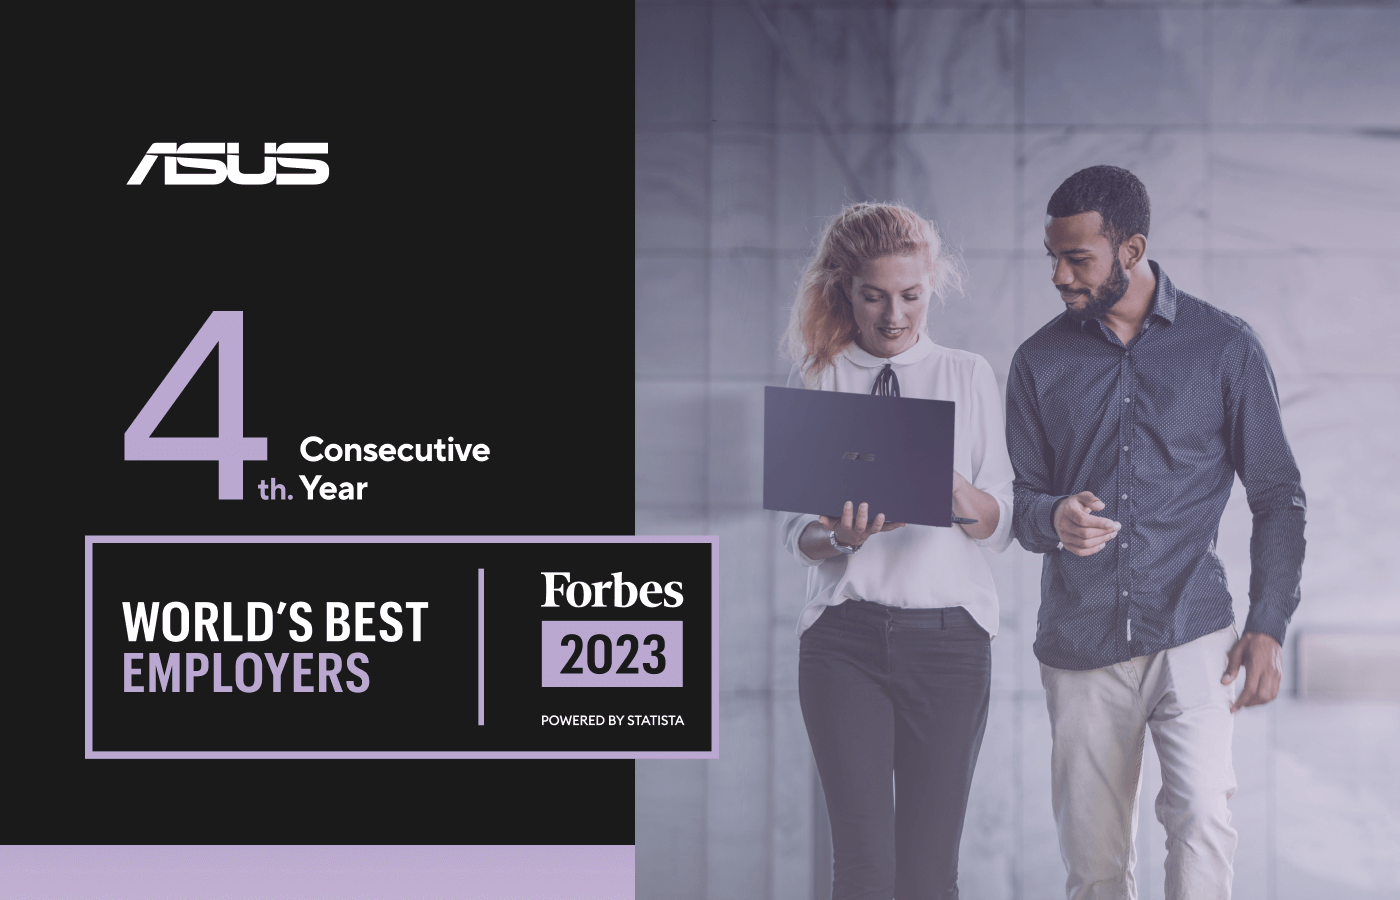 4th consecutive Year - World's Best Employers Forbes 2023 Powered by Statista